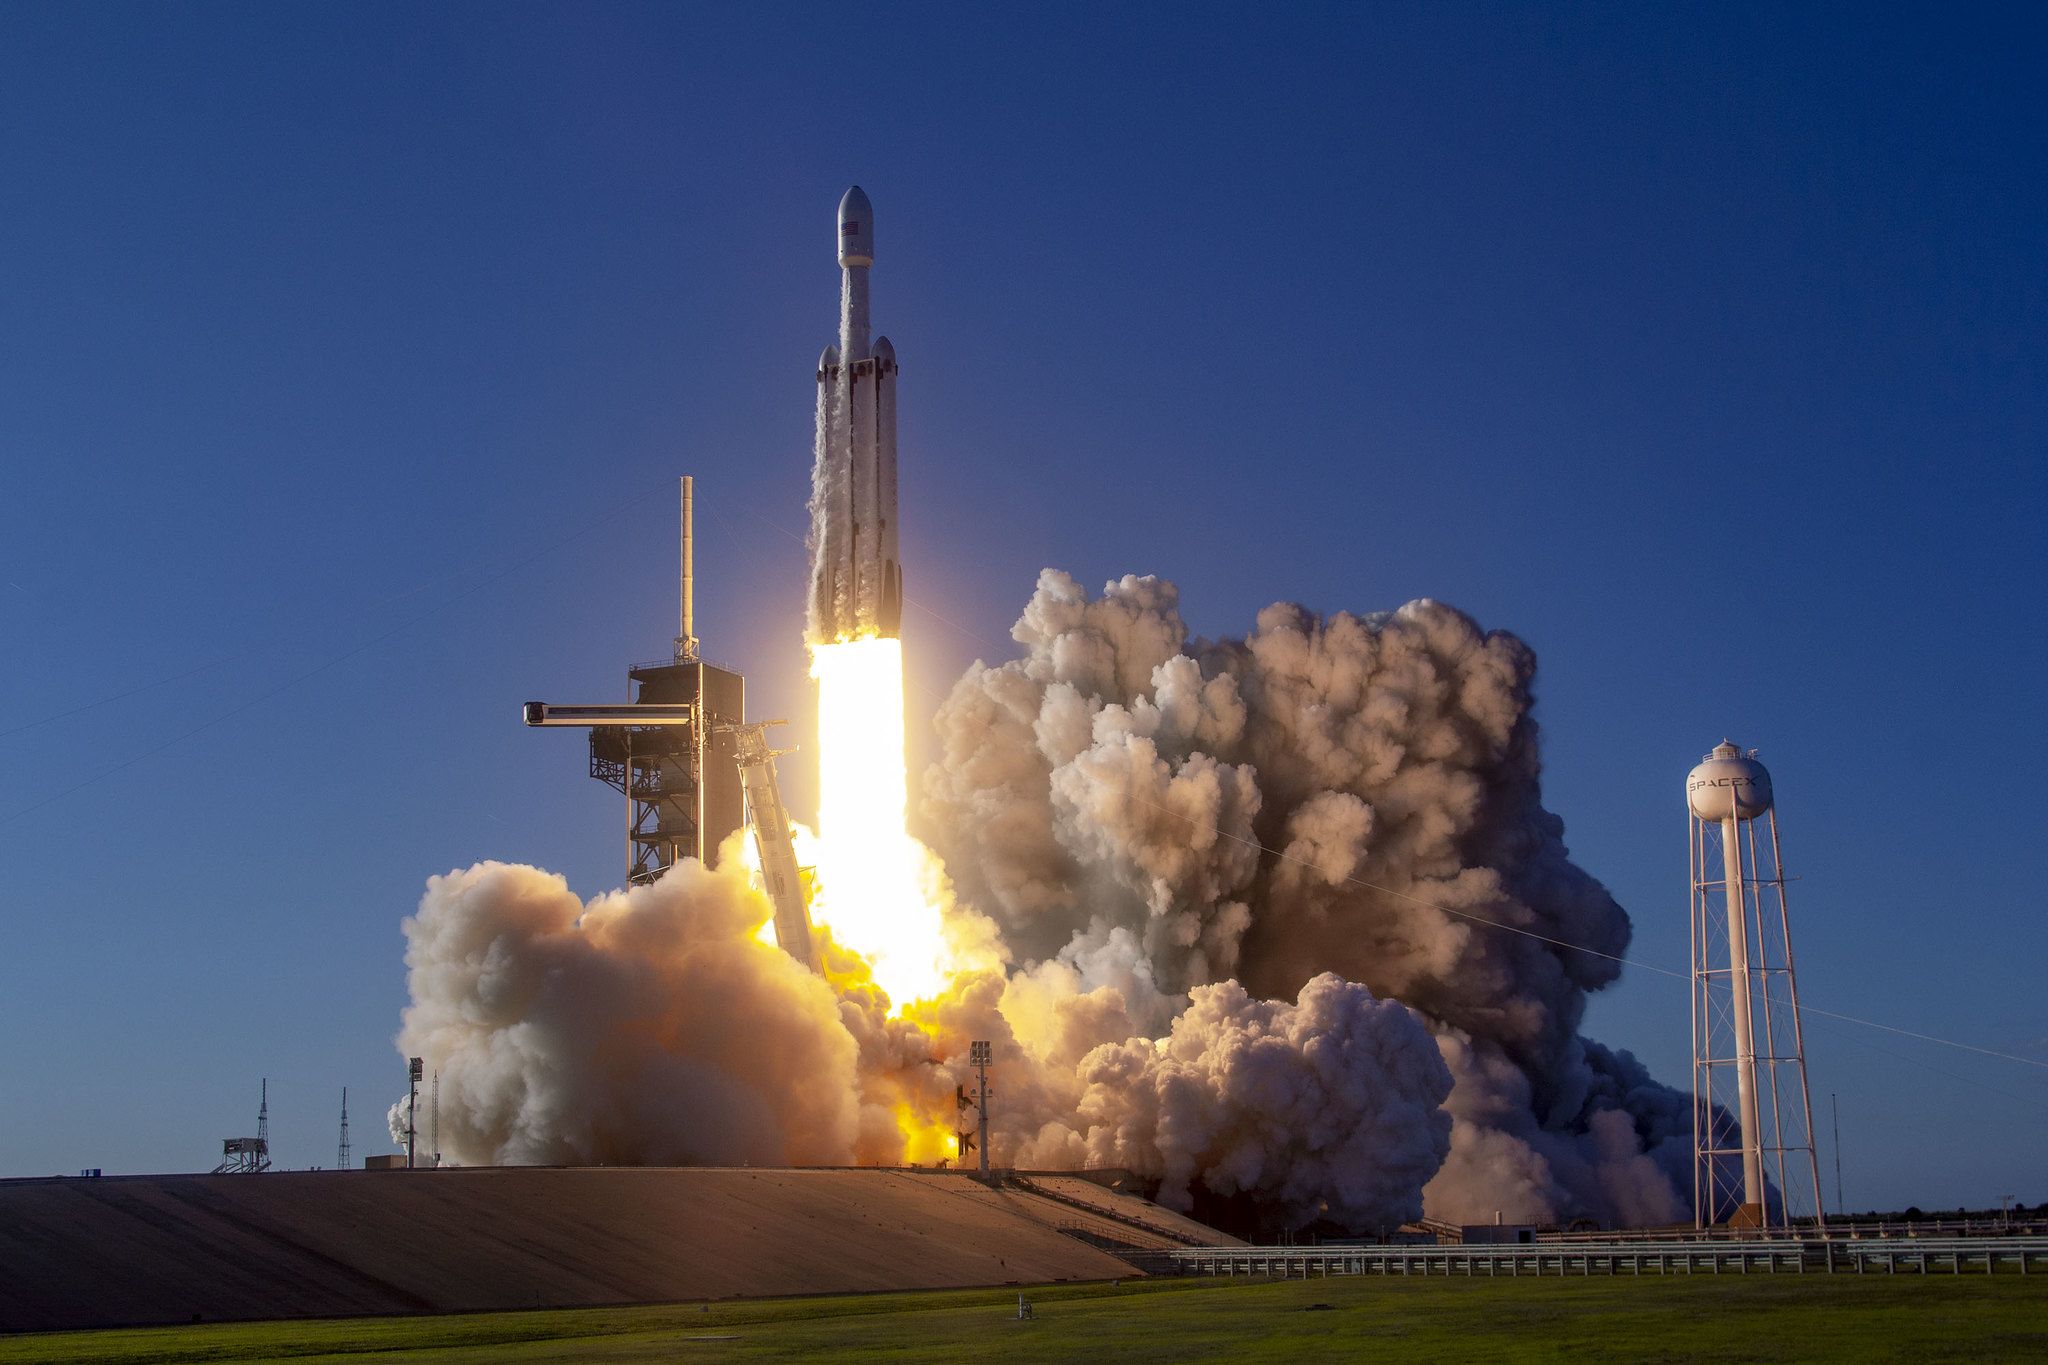 Watch Falcon Heavy launch complex Air Force mission